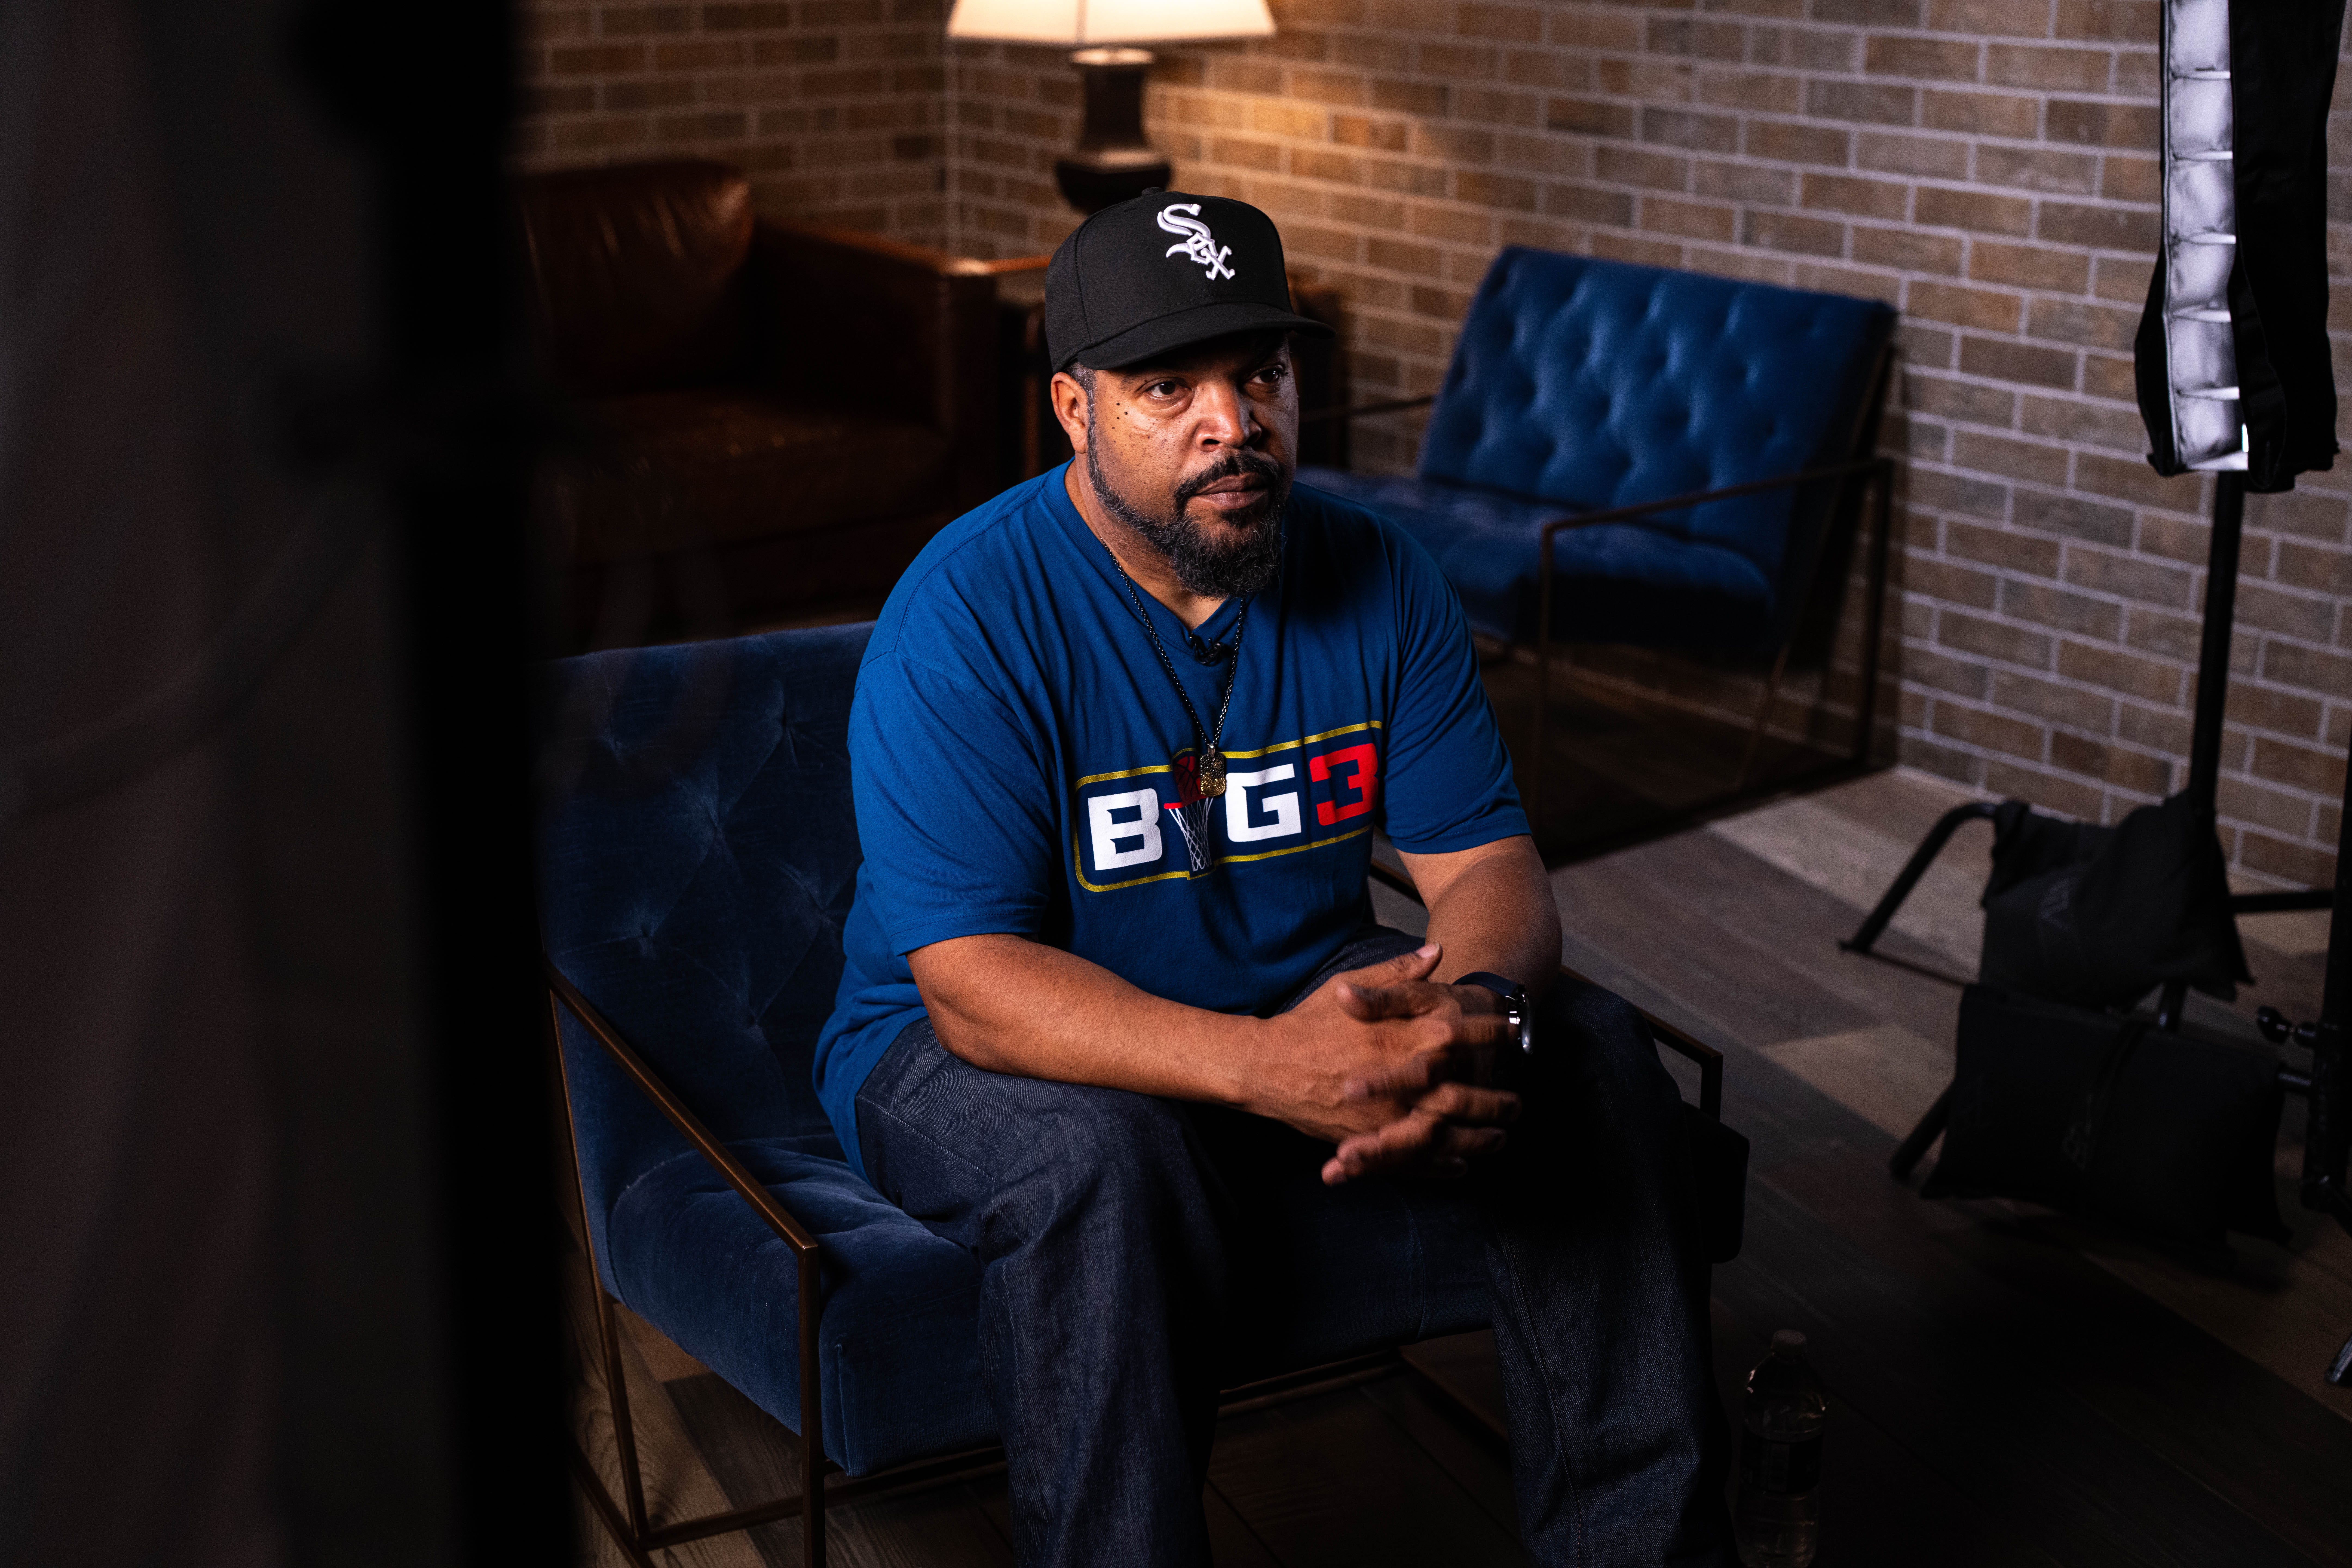 White Sox produce Fitted in Black documentary on 1990s team rebrand and hip  hop